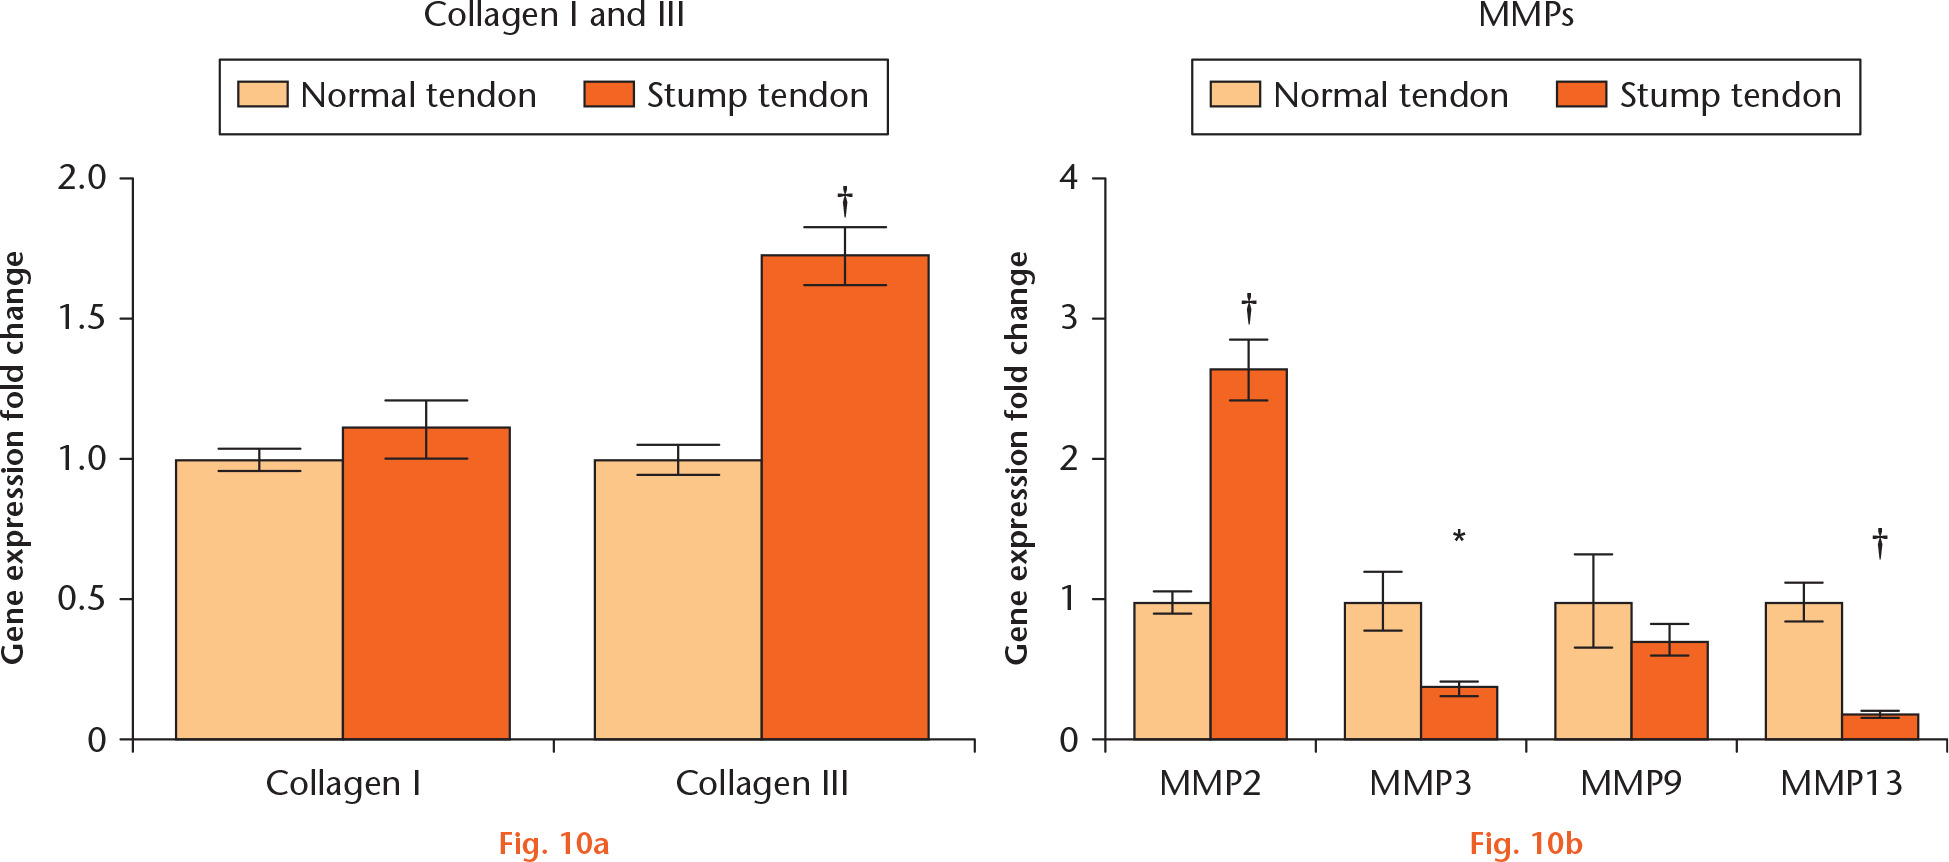 Fig. 10 
            Gene expression of collagens I and III and matrix metalloproteinases (MMPs) in stump and normal tendon-derived stem cells (TDSCs). a) The stump TDSCs had significantly higher collagen III gene expression than normal TDSCs, but not collagen I. b) Stump TDSCs had significantly higher MMP2 gene expression than normal TDSCs but significantly lower MMP3 and MMP13 gene expression than normal TDSCs. The polymerase chain reaction data are expressed as means and standard errors of six samples (n = 6) in triplicate and normalized to normal TDSC. *p < 0.05; †p < 0.01 (unpaired Student’s t-test).
          